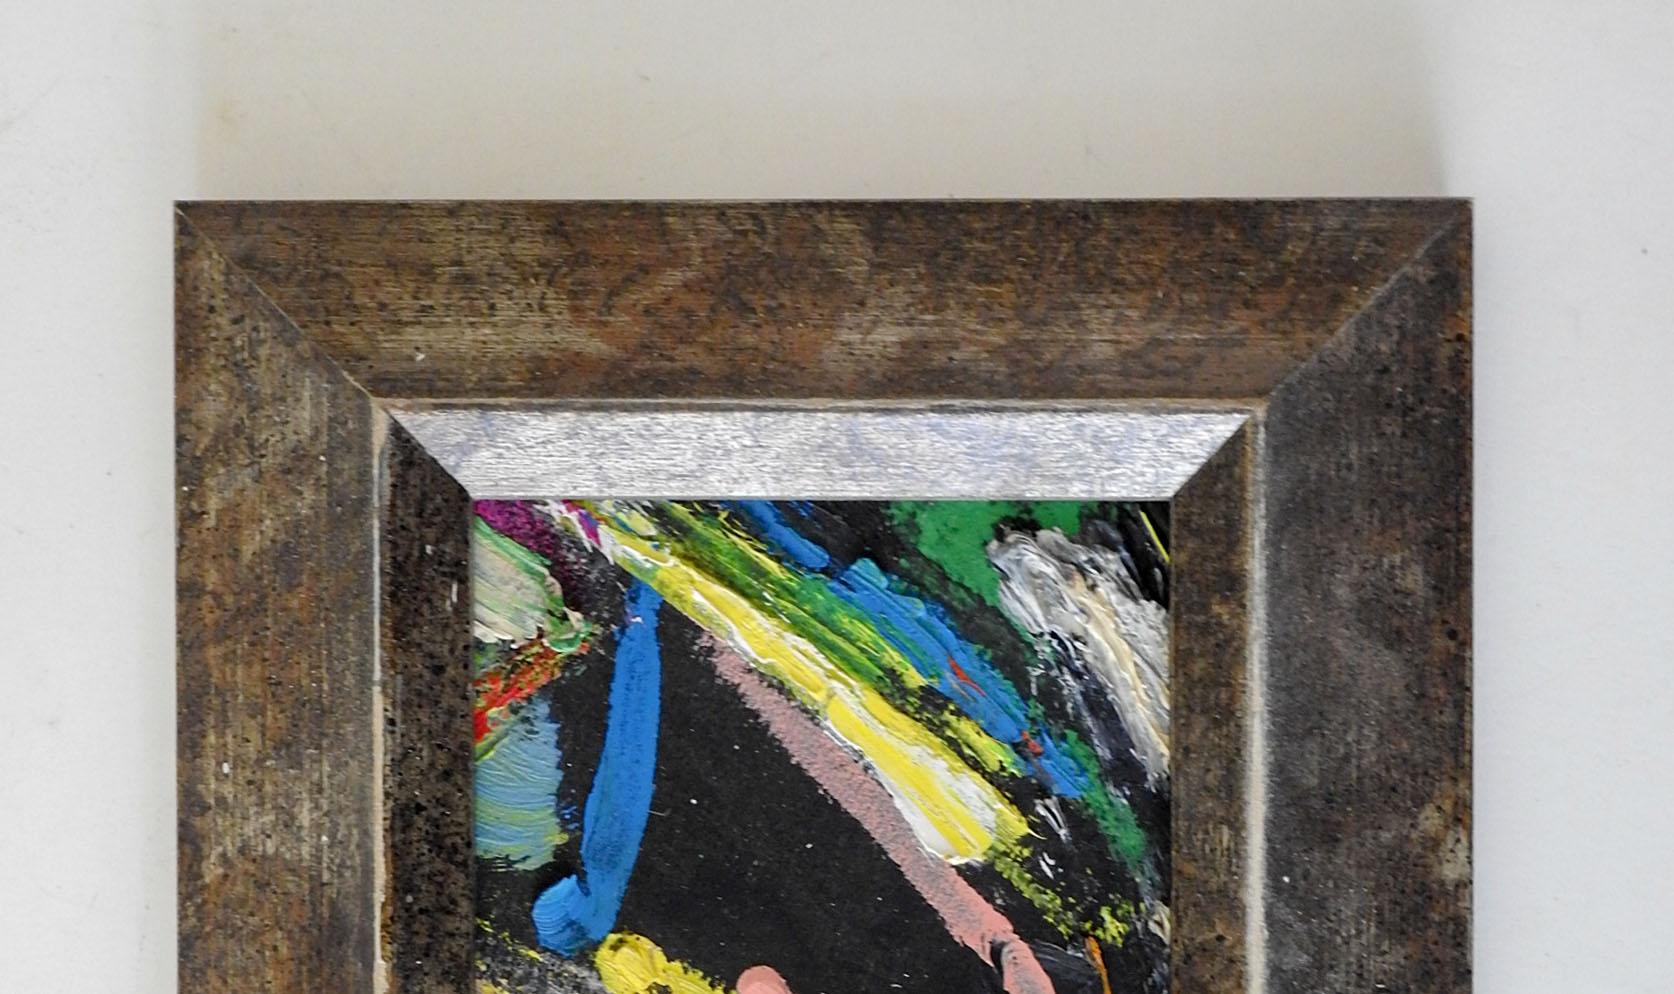 Small late 20th century acrylic on paper abstract painting in pink, yellow and black. Unsigned. Displayed in dark silver painted wood frame, scuffing to frame.